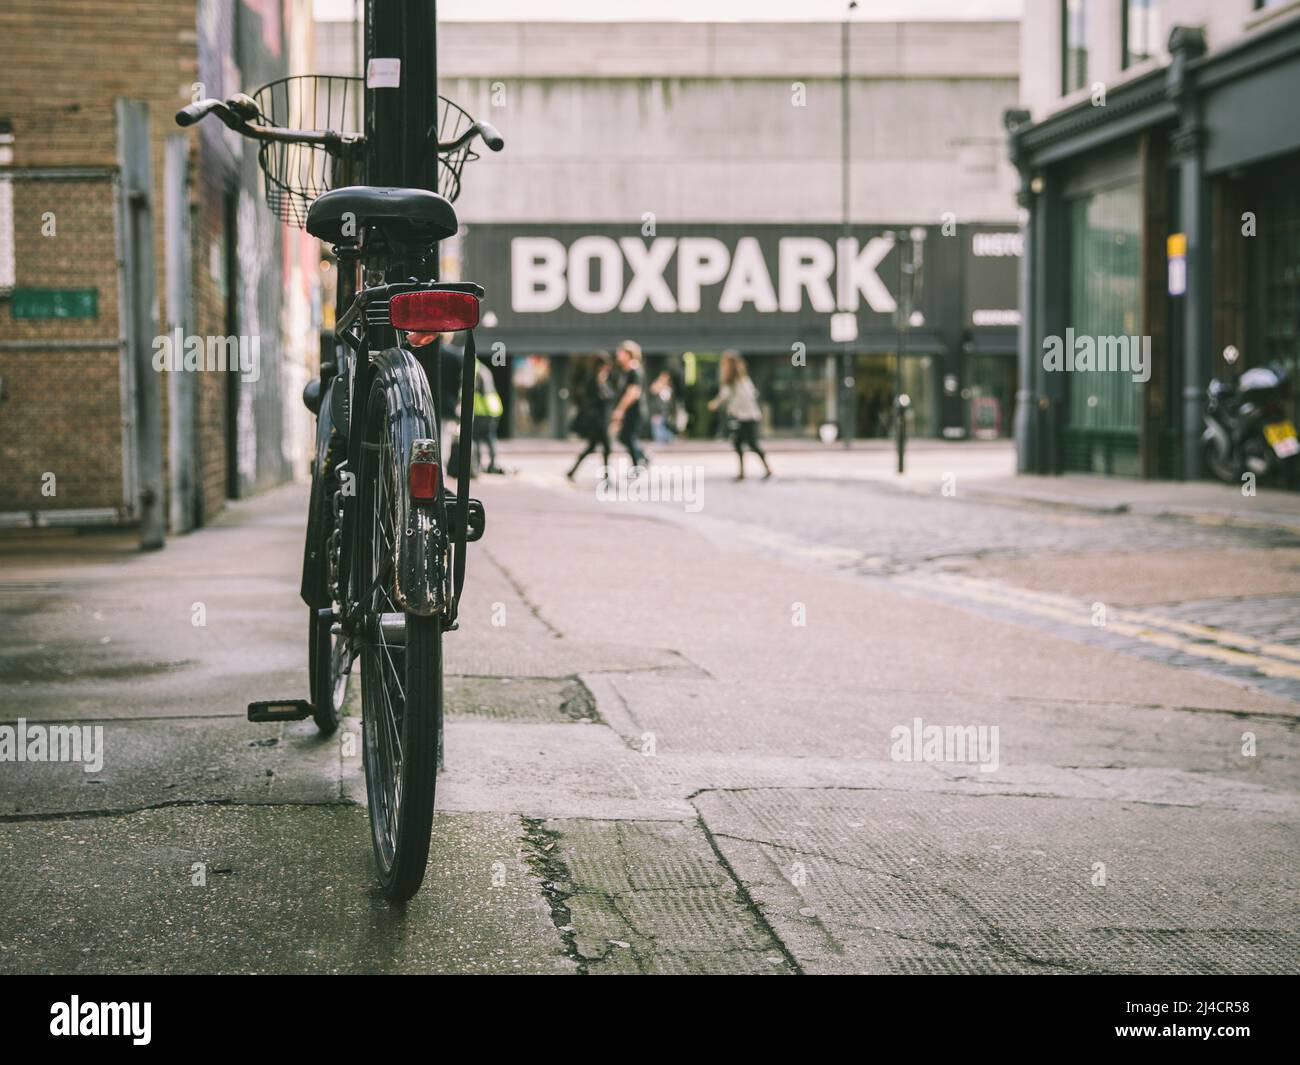 Shoreditch, London, UK - April 14, 2016: A stationary bicycle, with the Boxpark retail centre visible in the background. Stock Photo